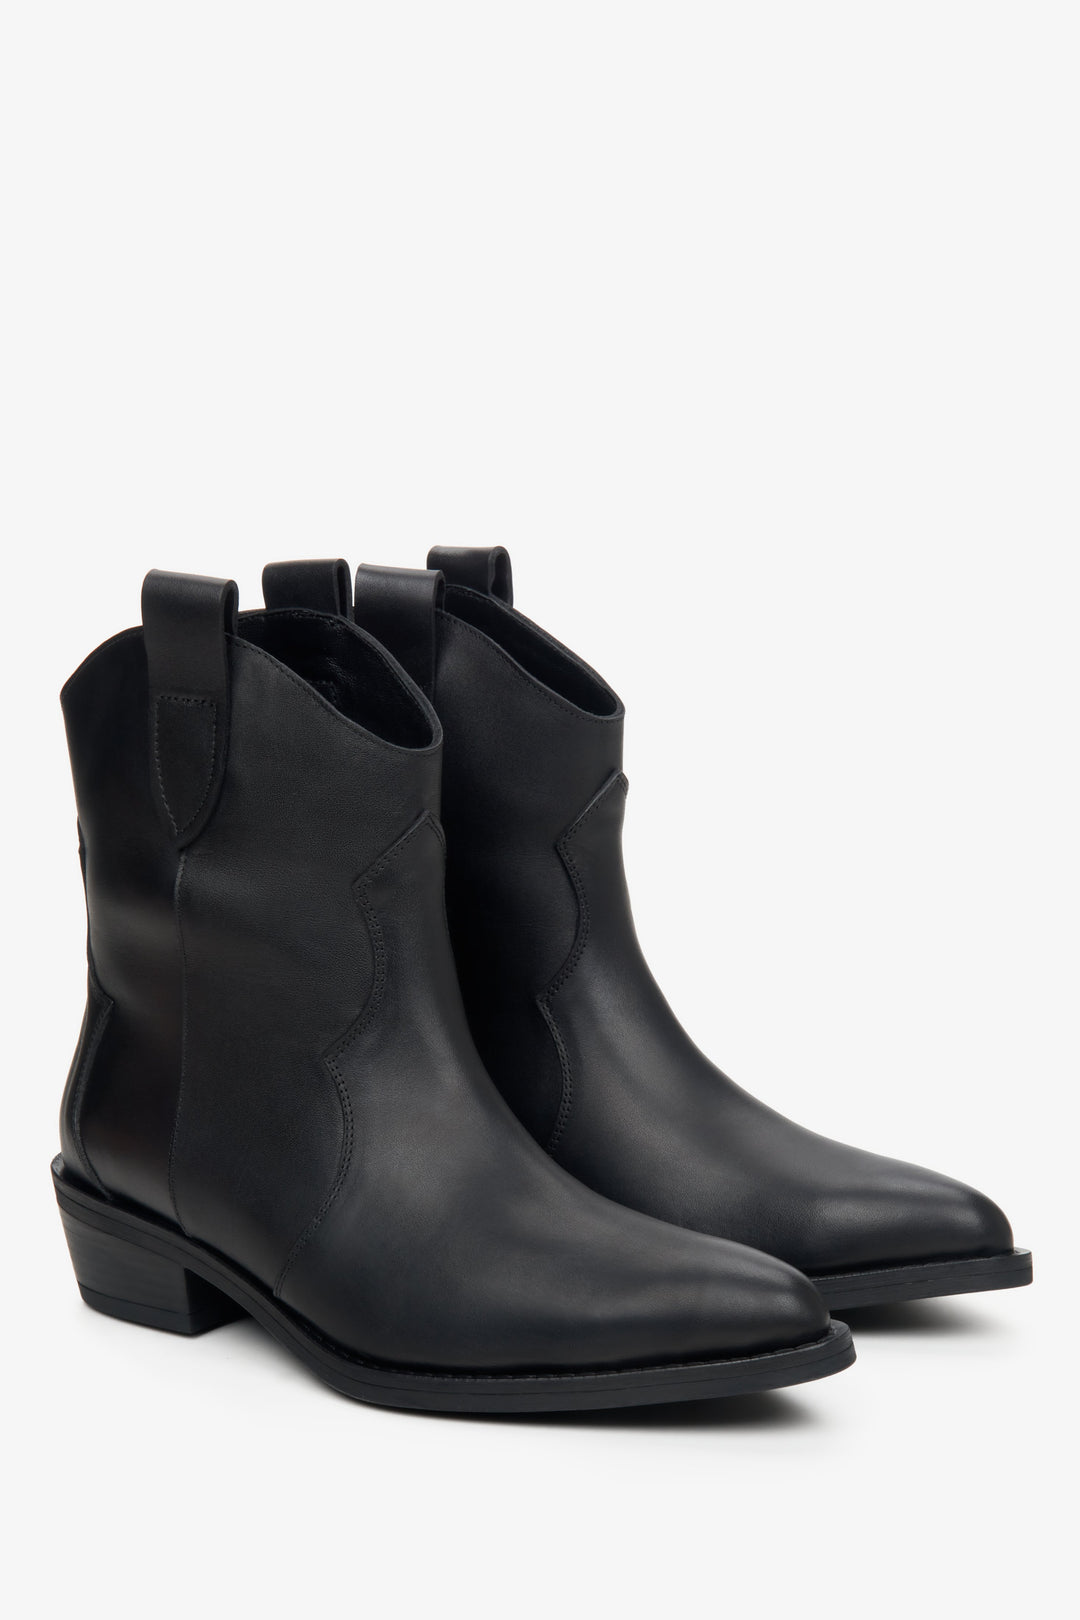 Women's black leather cowboy boots by Estro in genuine leather.